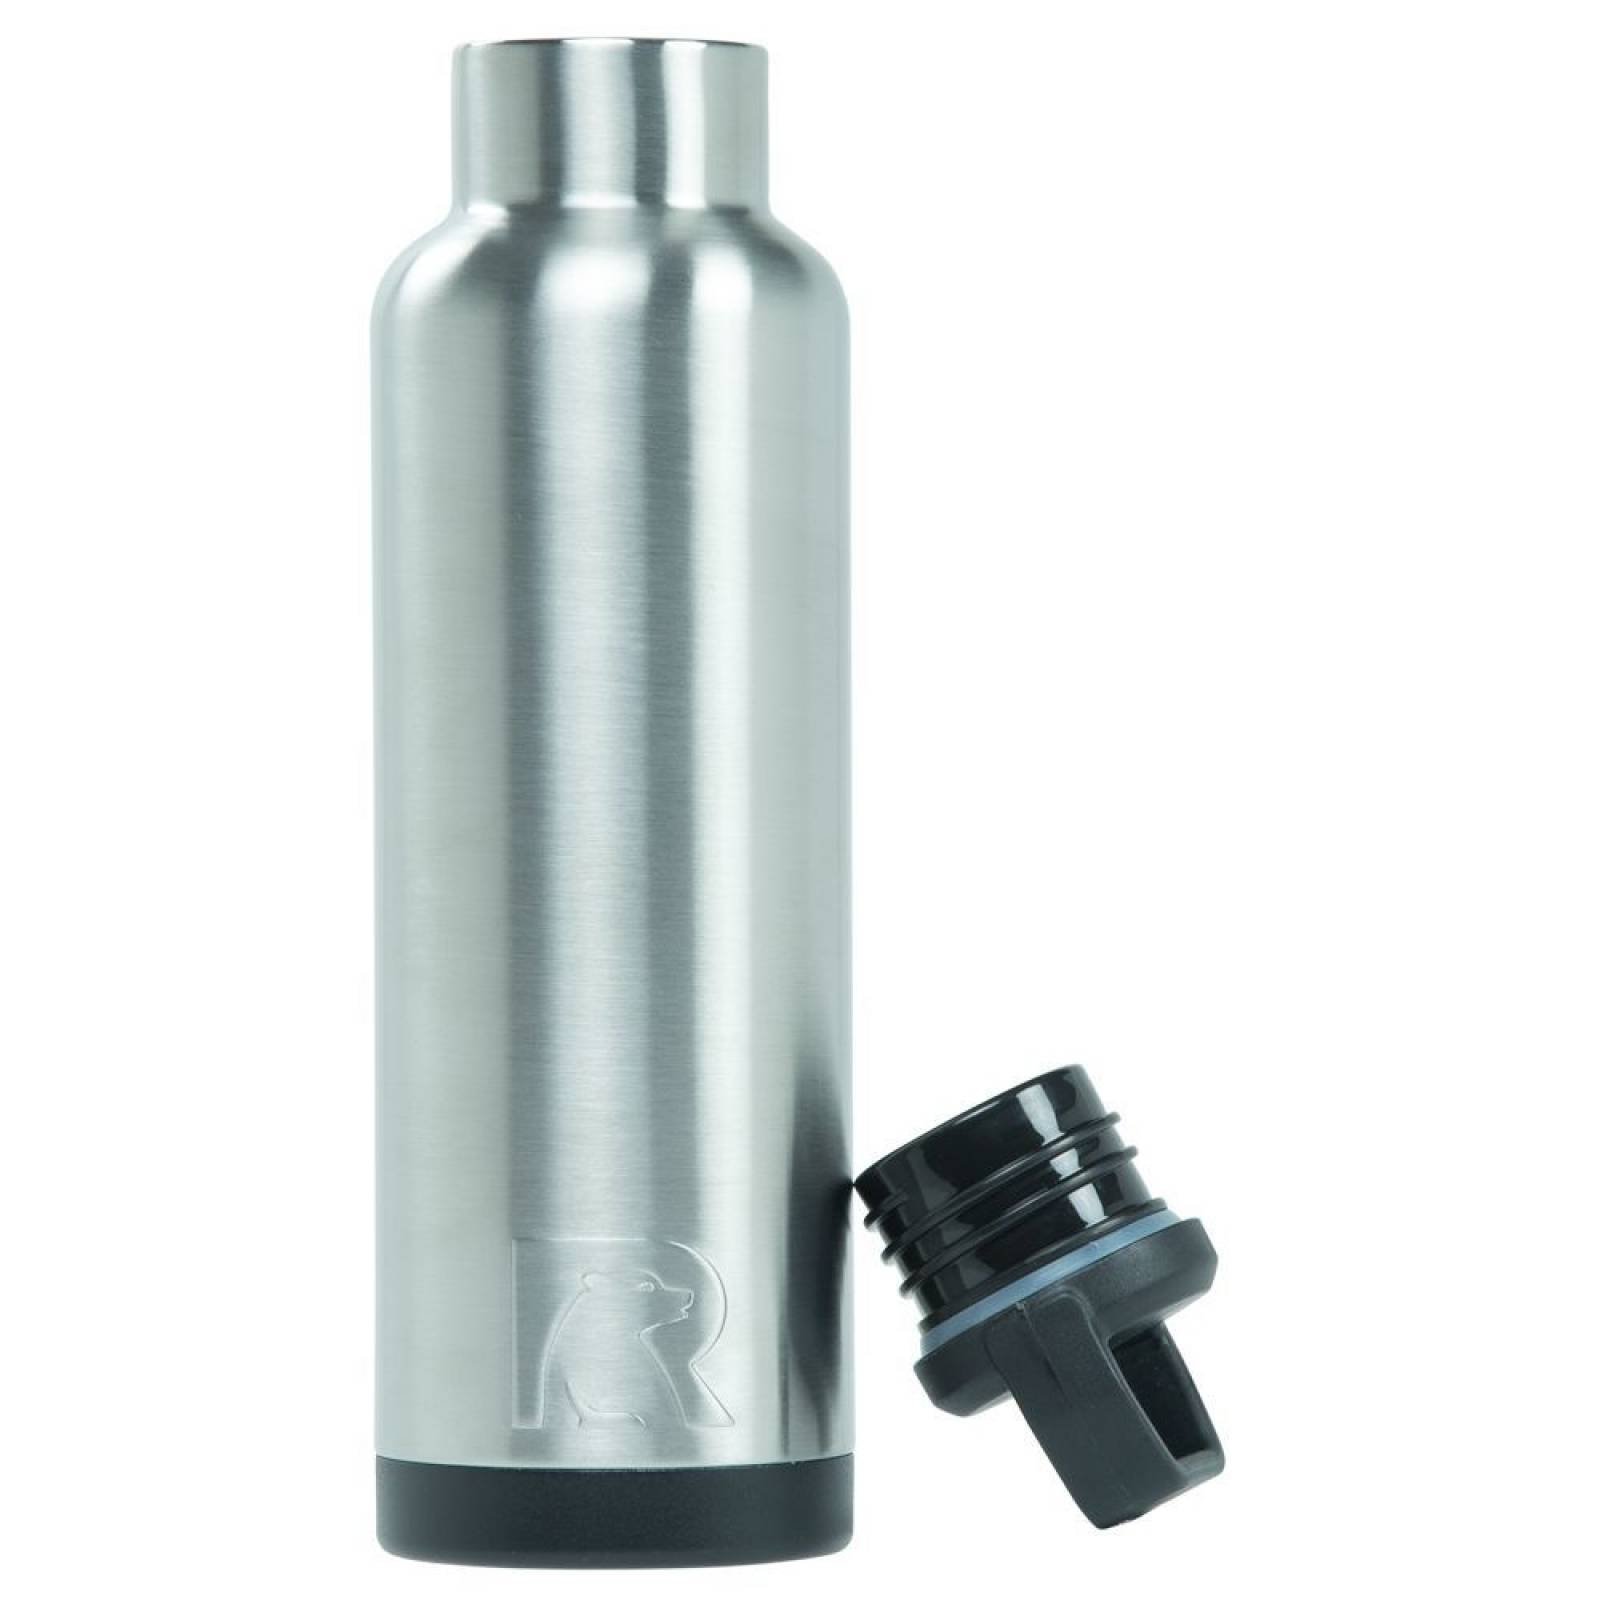 RTIC Water Bottle 20 oz. Stainless   914